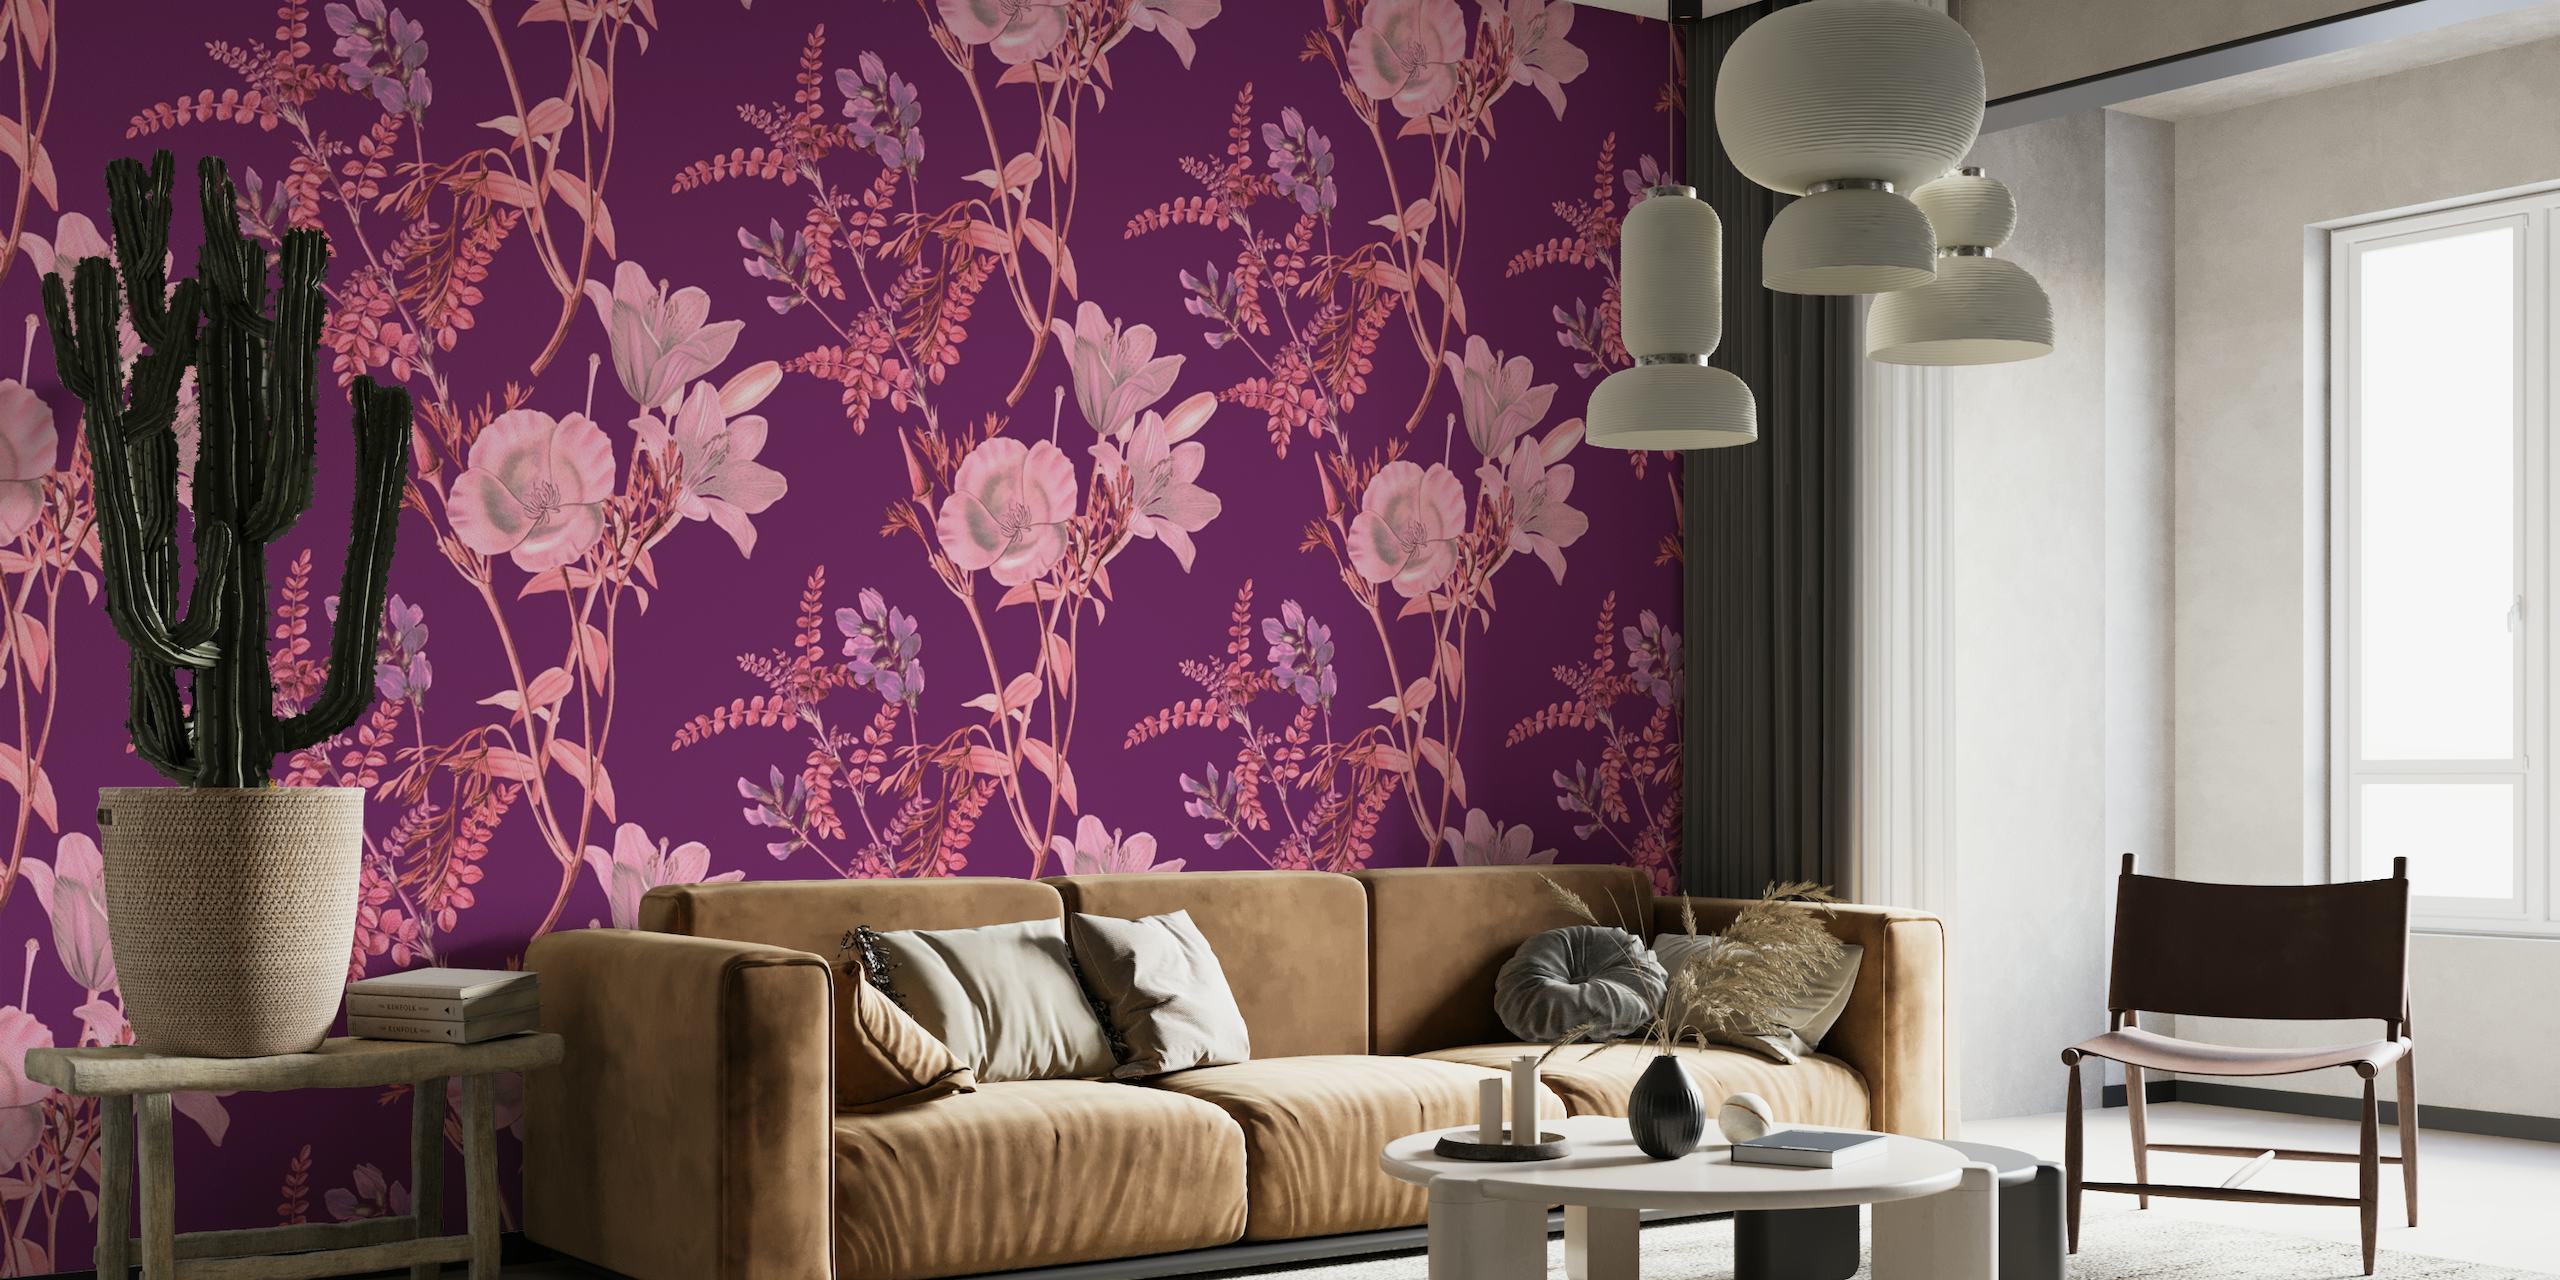 Magenta floral pattern wall mural with delicate pink and purple flowers on a rich magenta background.